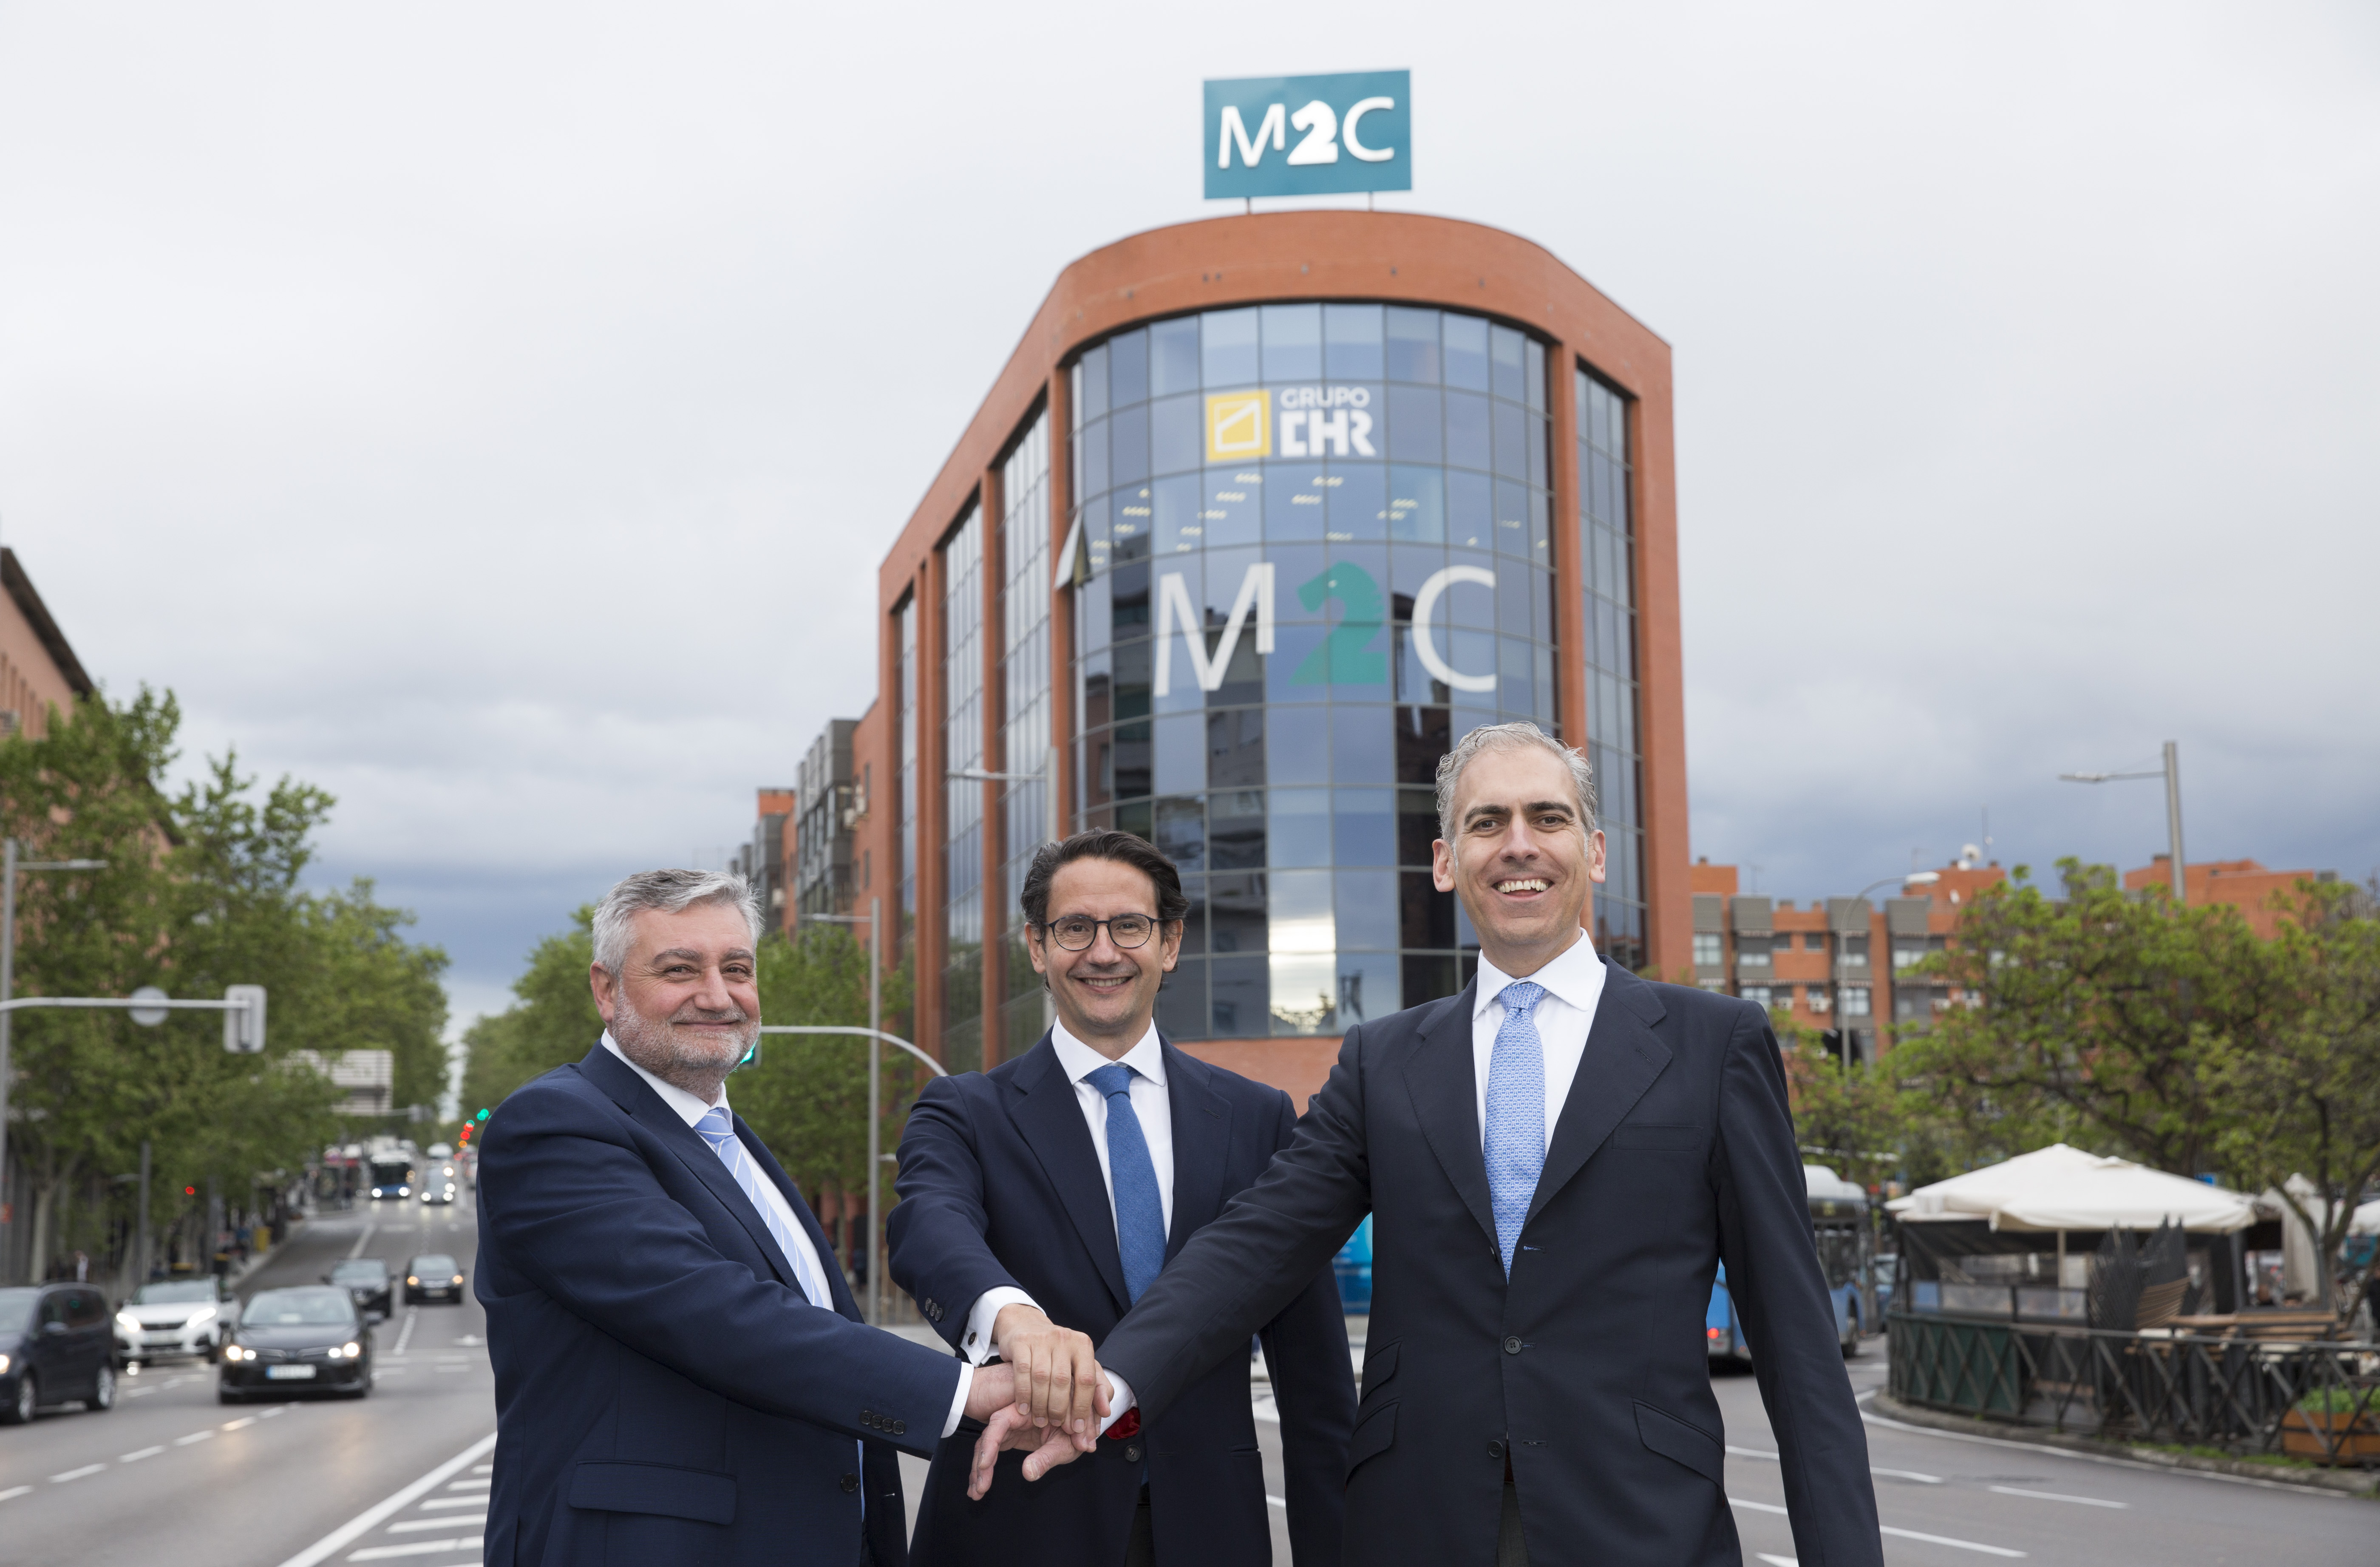 Ayesa acquires M2C, a leading Spanish IT consulting firm